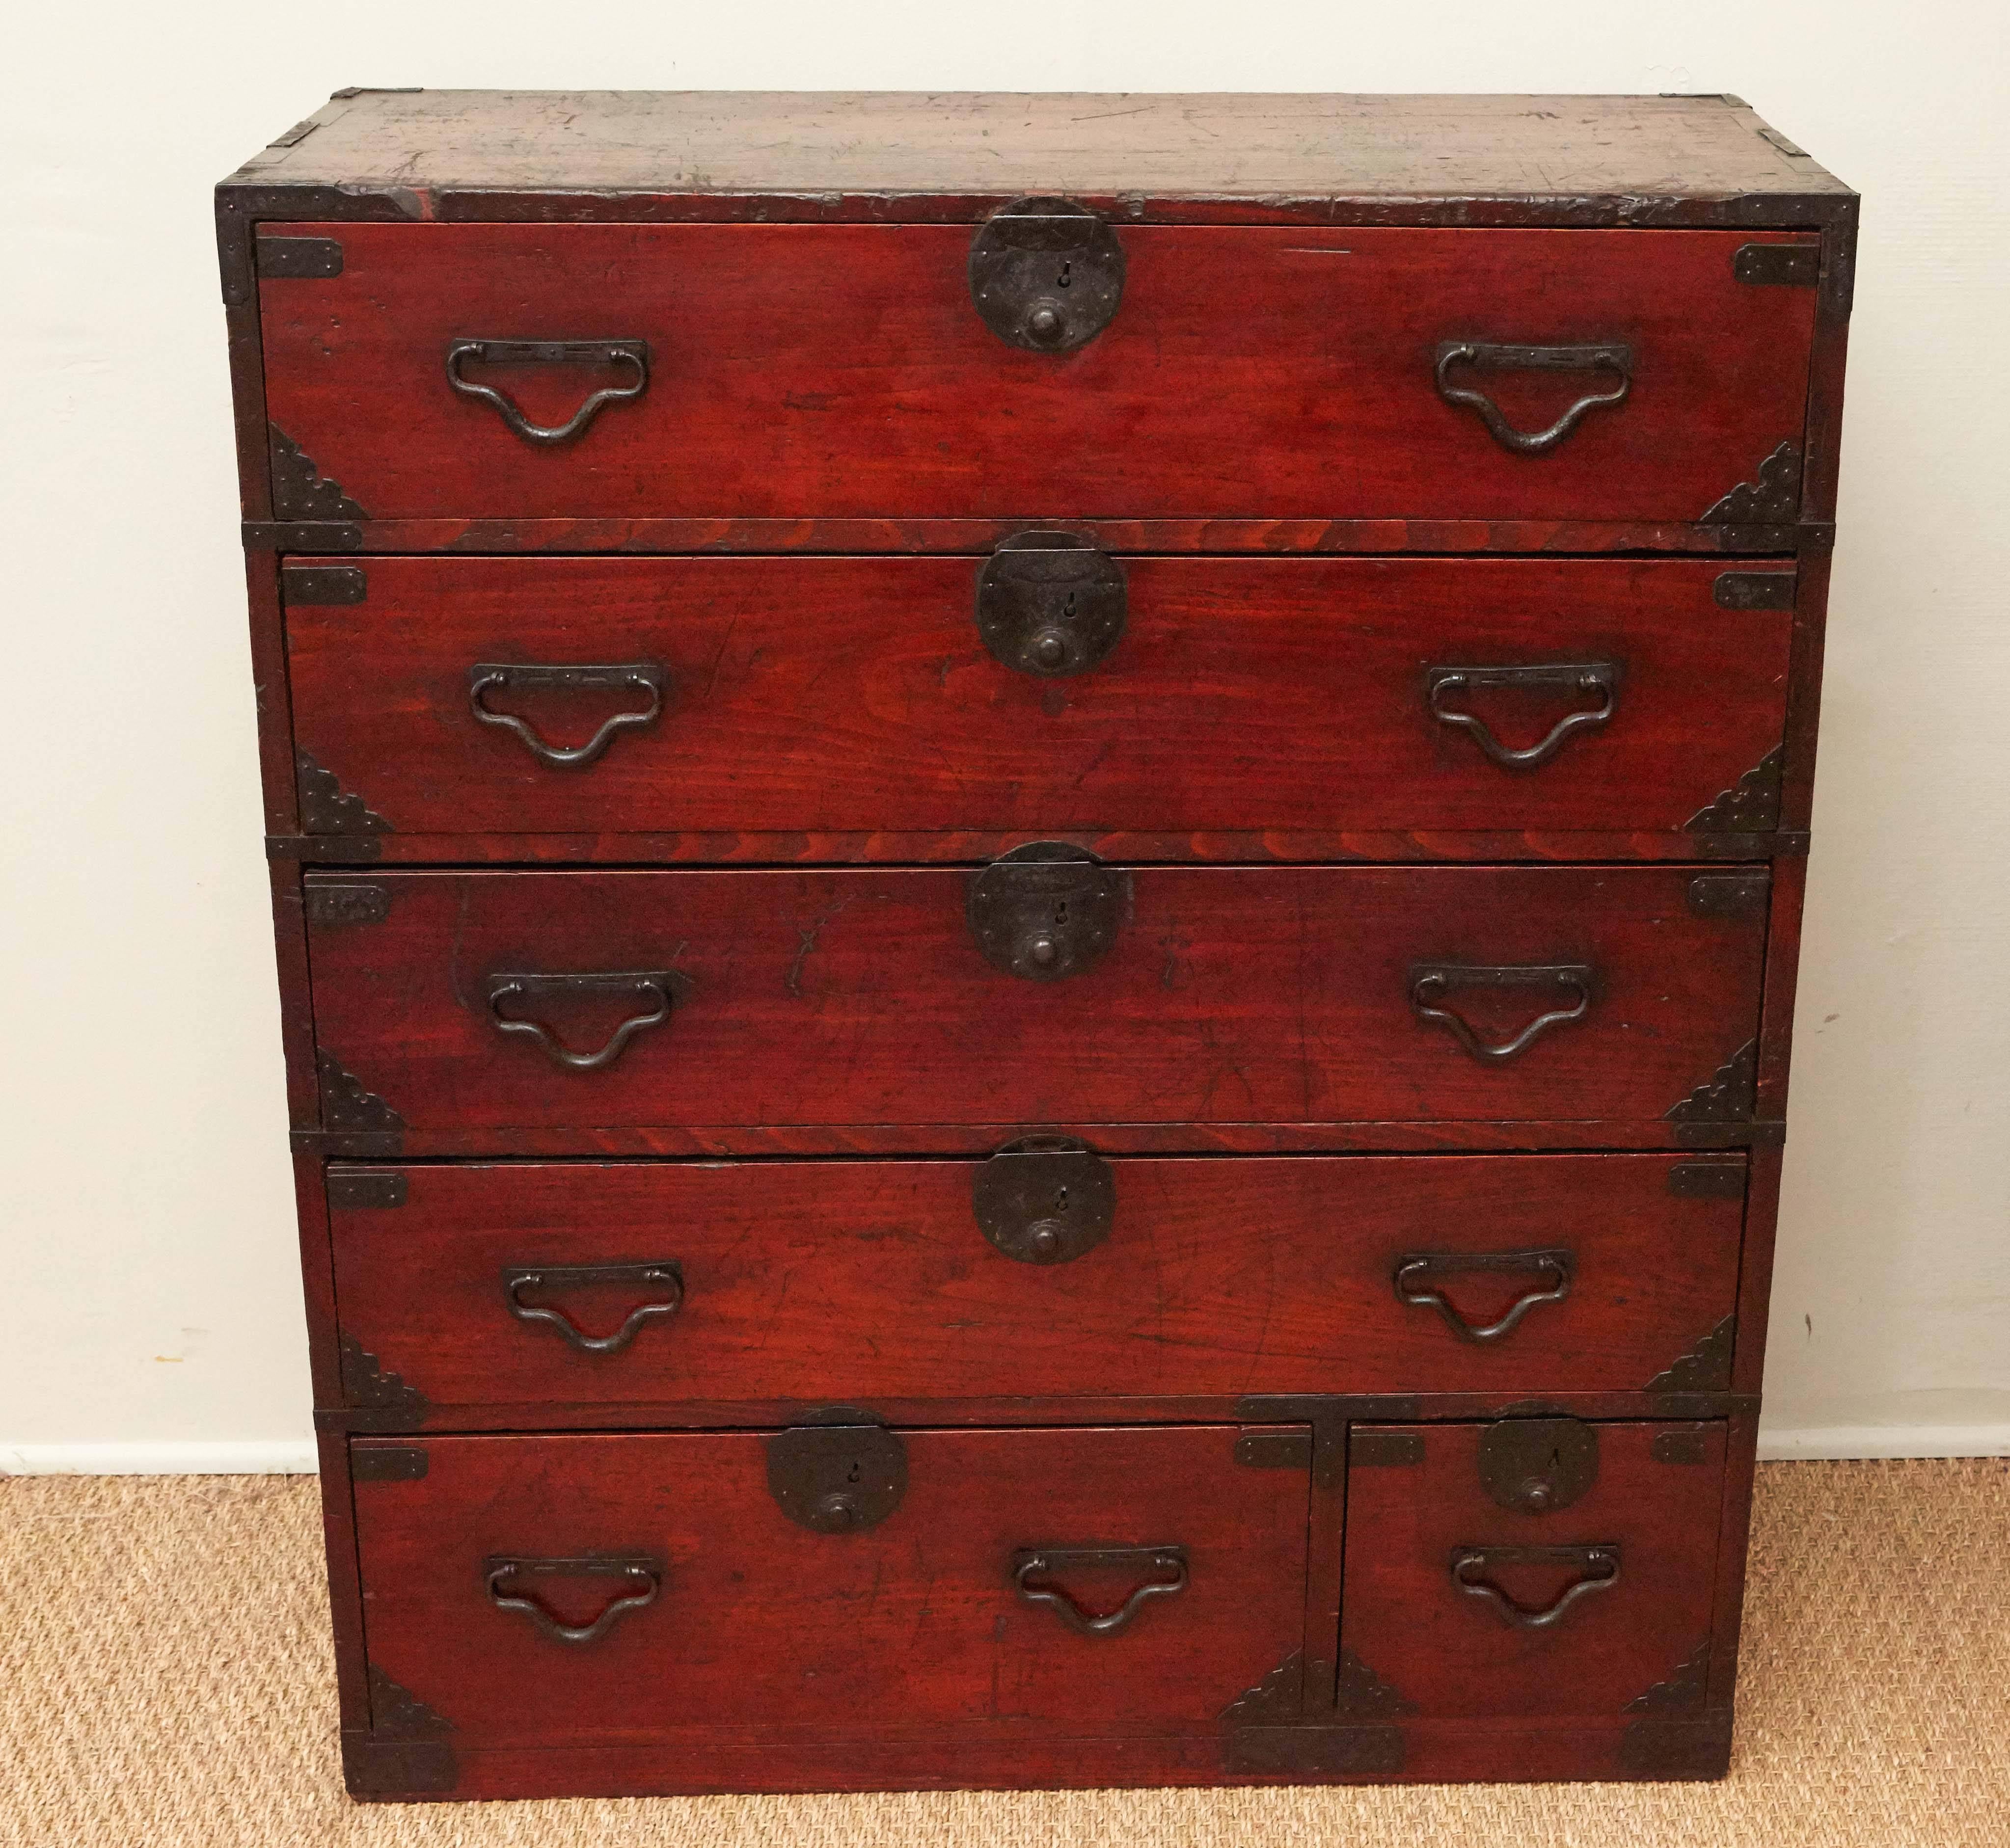 Early 20th century cedar wood Kimono Tansu with five levels, six drawers (two on bottom as shown).  Some age appropriate wear.